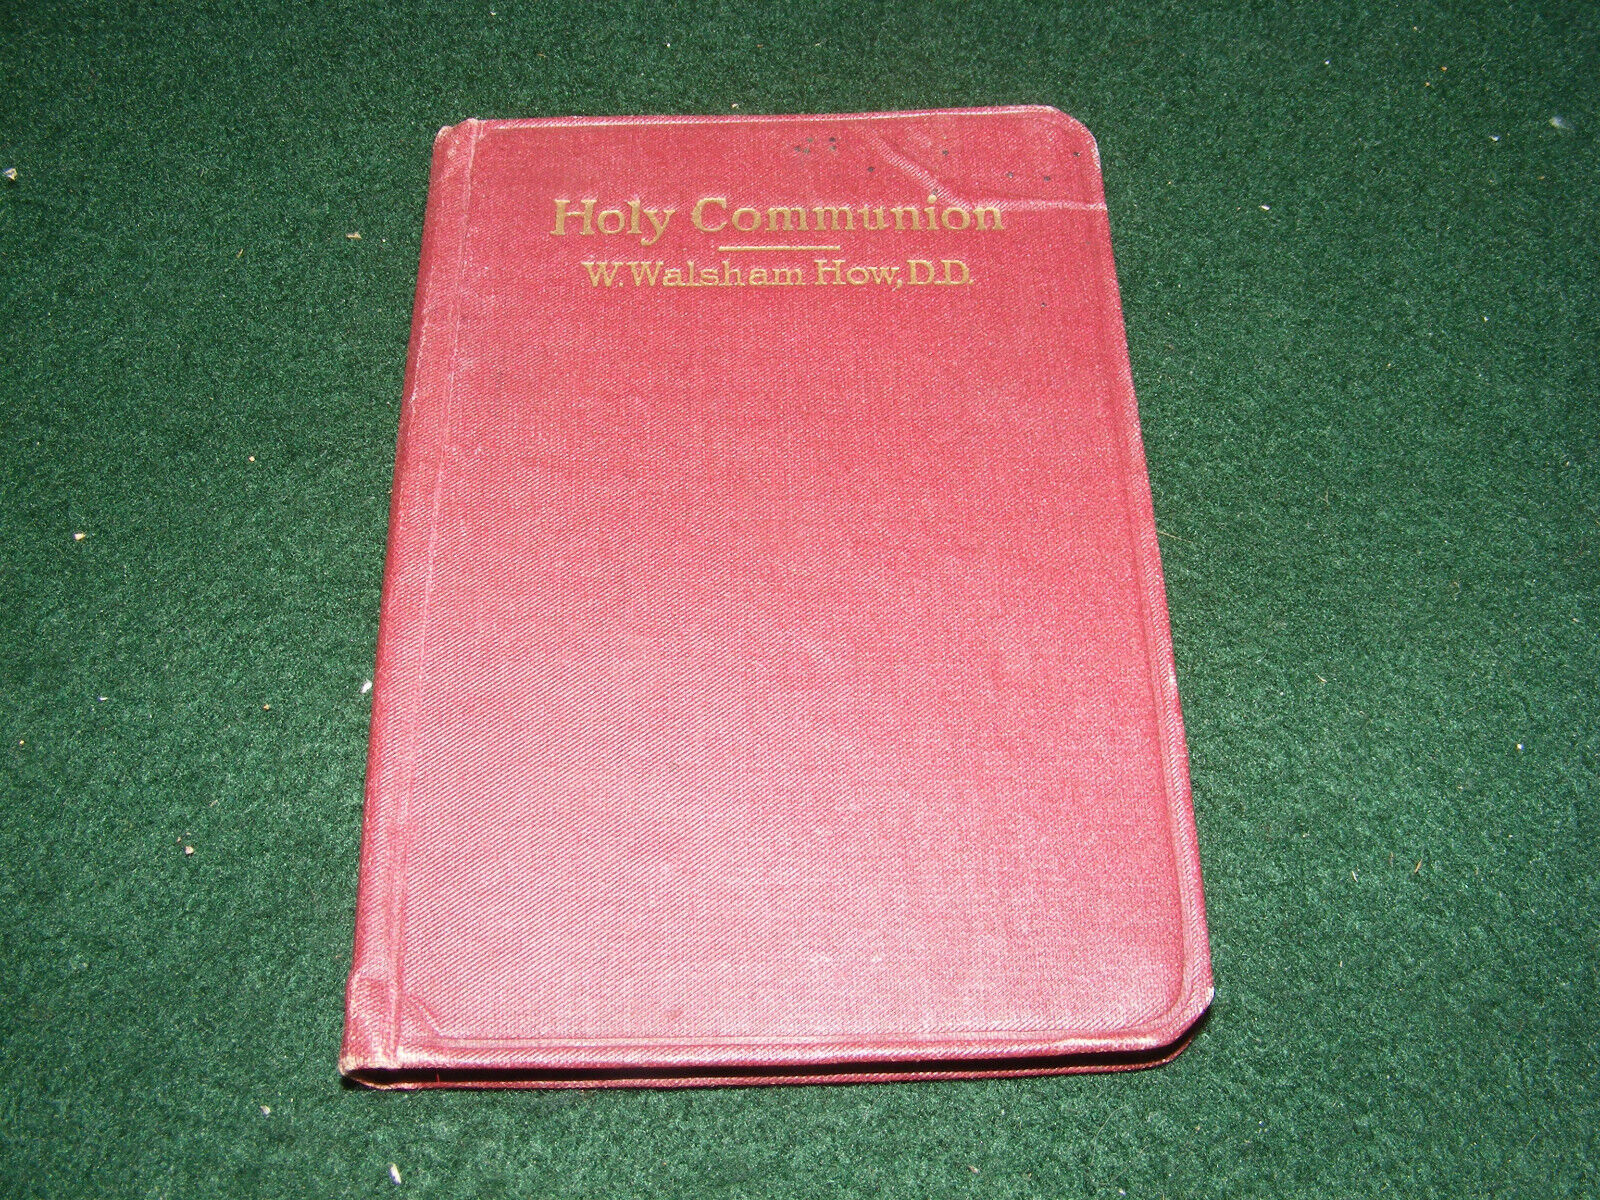 VINTAGE HOLY COMMUNION BOOKLET BY W WALSHAM HOW CONFIRMATION LLANFECHAIN 1919